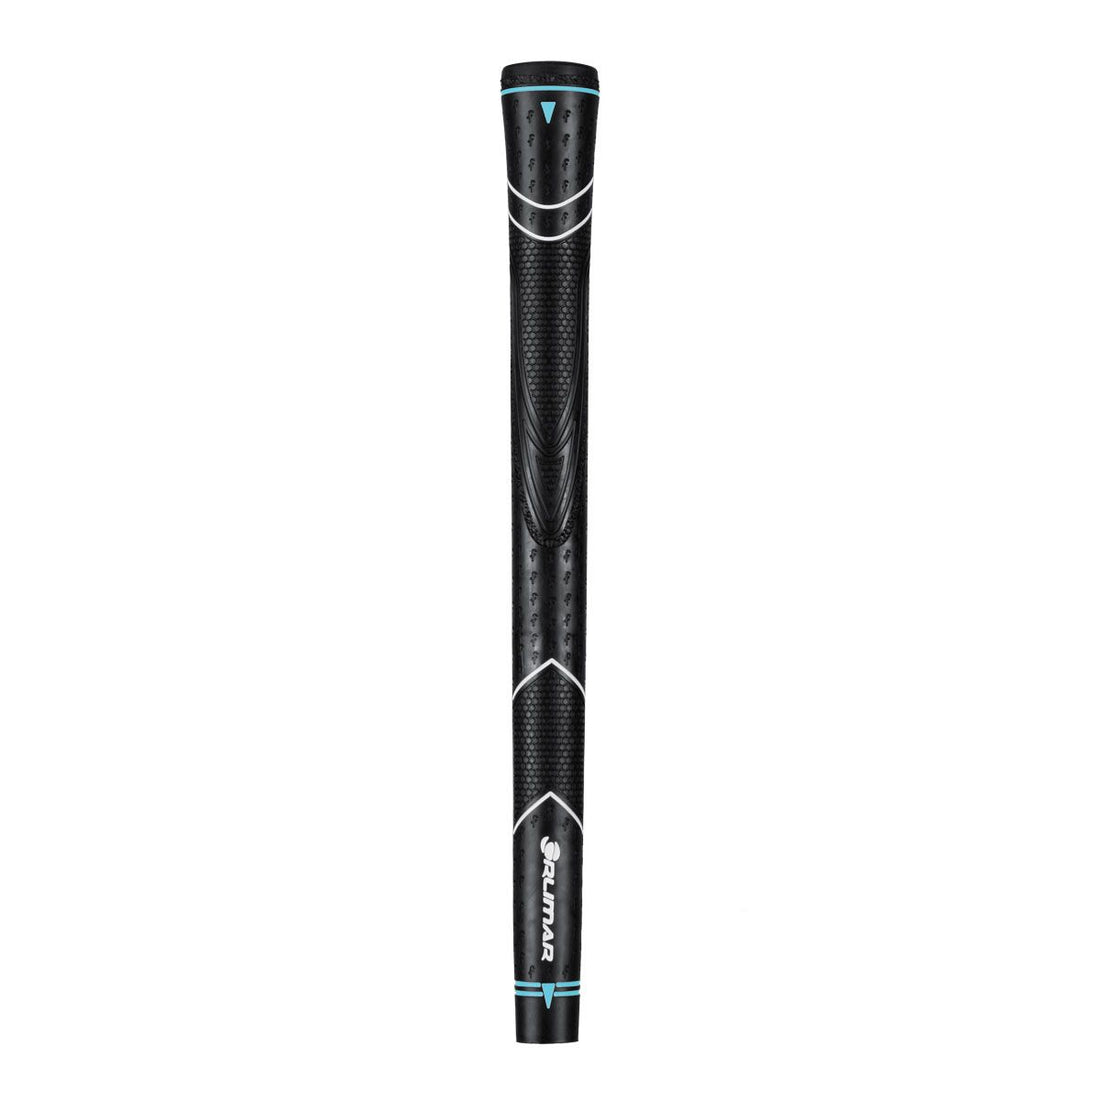 Orlimar ATS Junior Girls Sky Blue Series black golf grip with white and sky blue accent colors